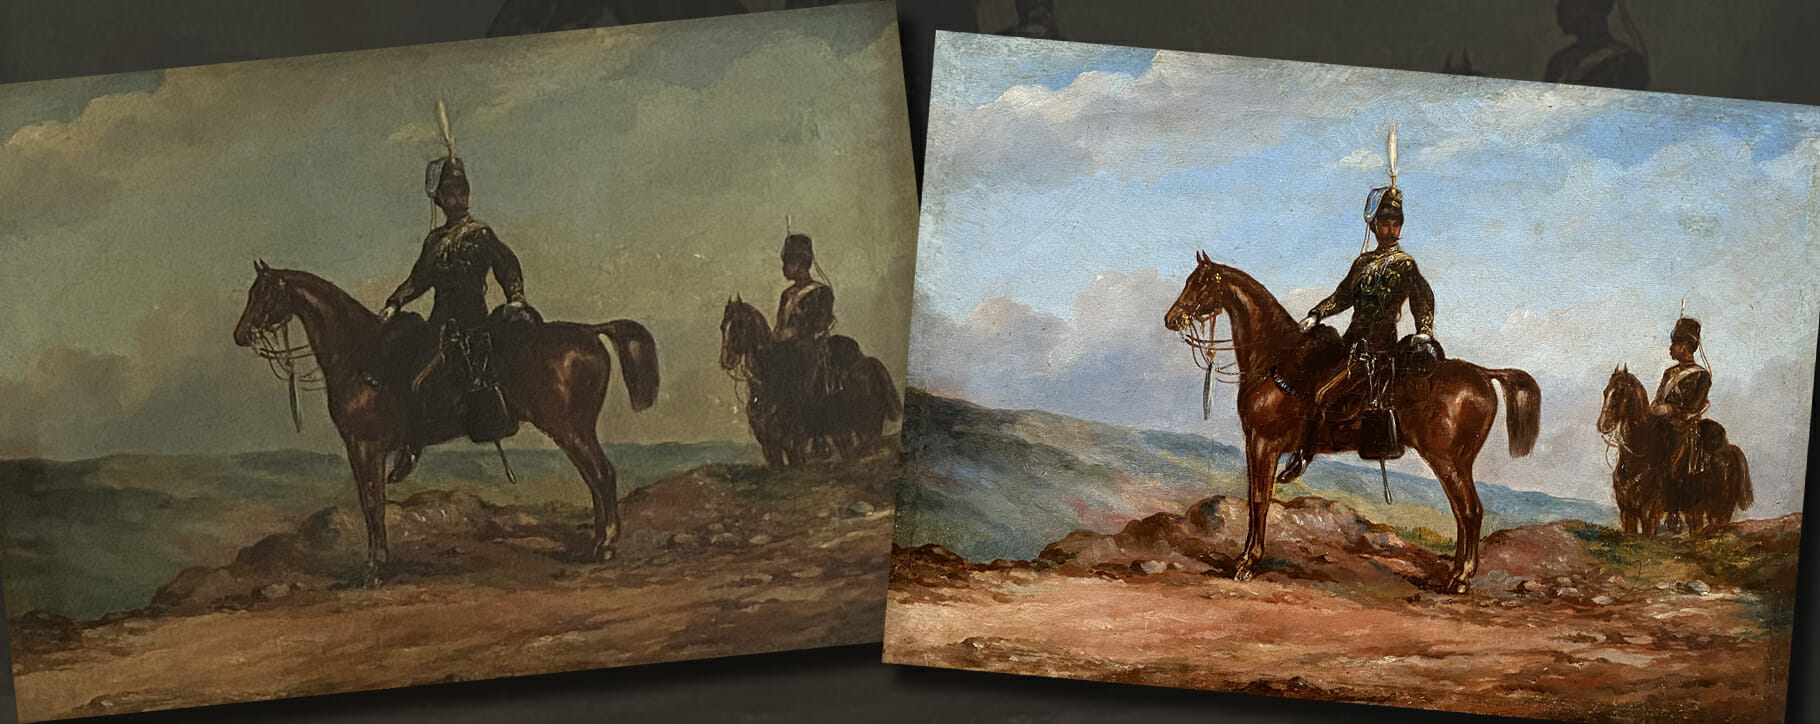 Military painting restoration - man and horse